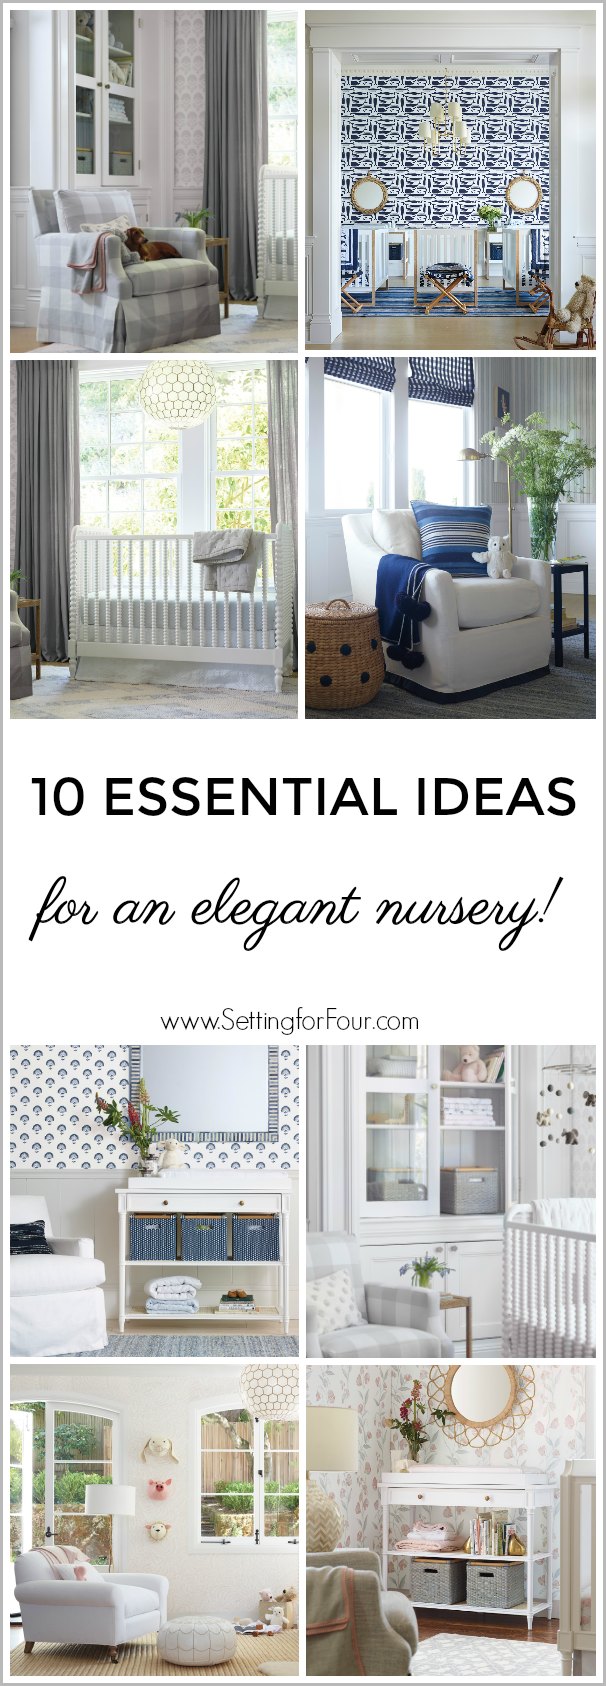 See these 10 Essential Ideas for an Elegant Nursery - stylish furniture designs and decor ideas that will grow with your family! #elegant #nursery #furniture #design #decor #decorideas #boy #girl #neutral 